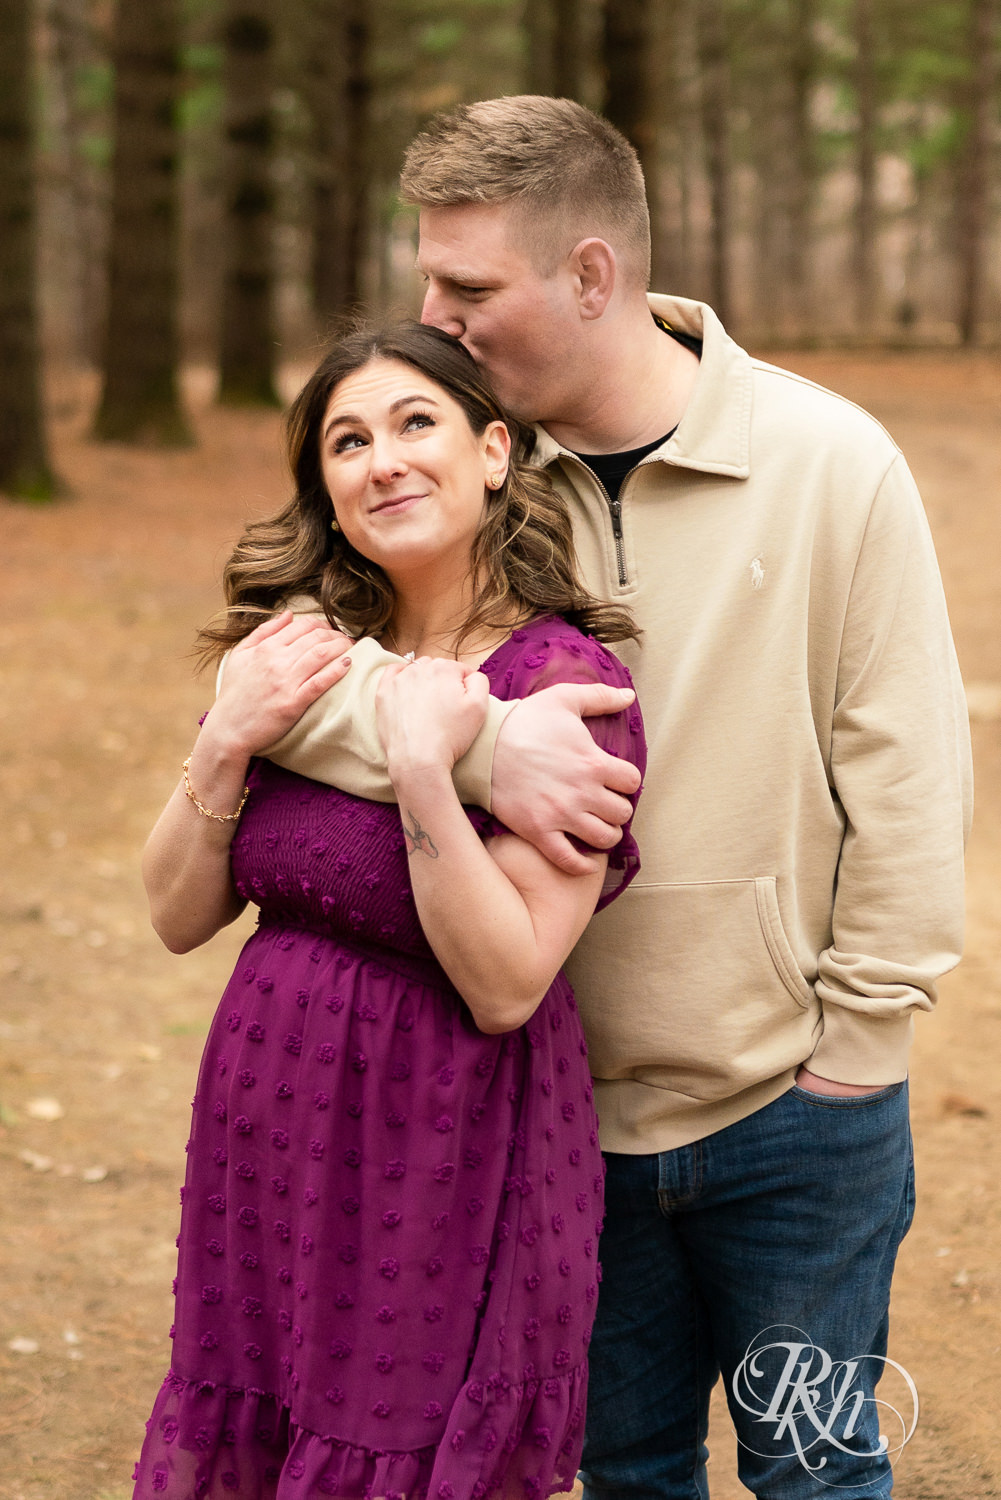 Man in jeans and woman in magenta dress smile during engagement photos in Lebanon Hills in Eagan, Minnesota.